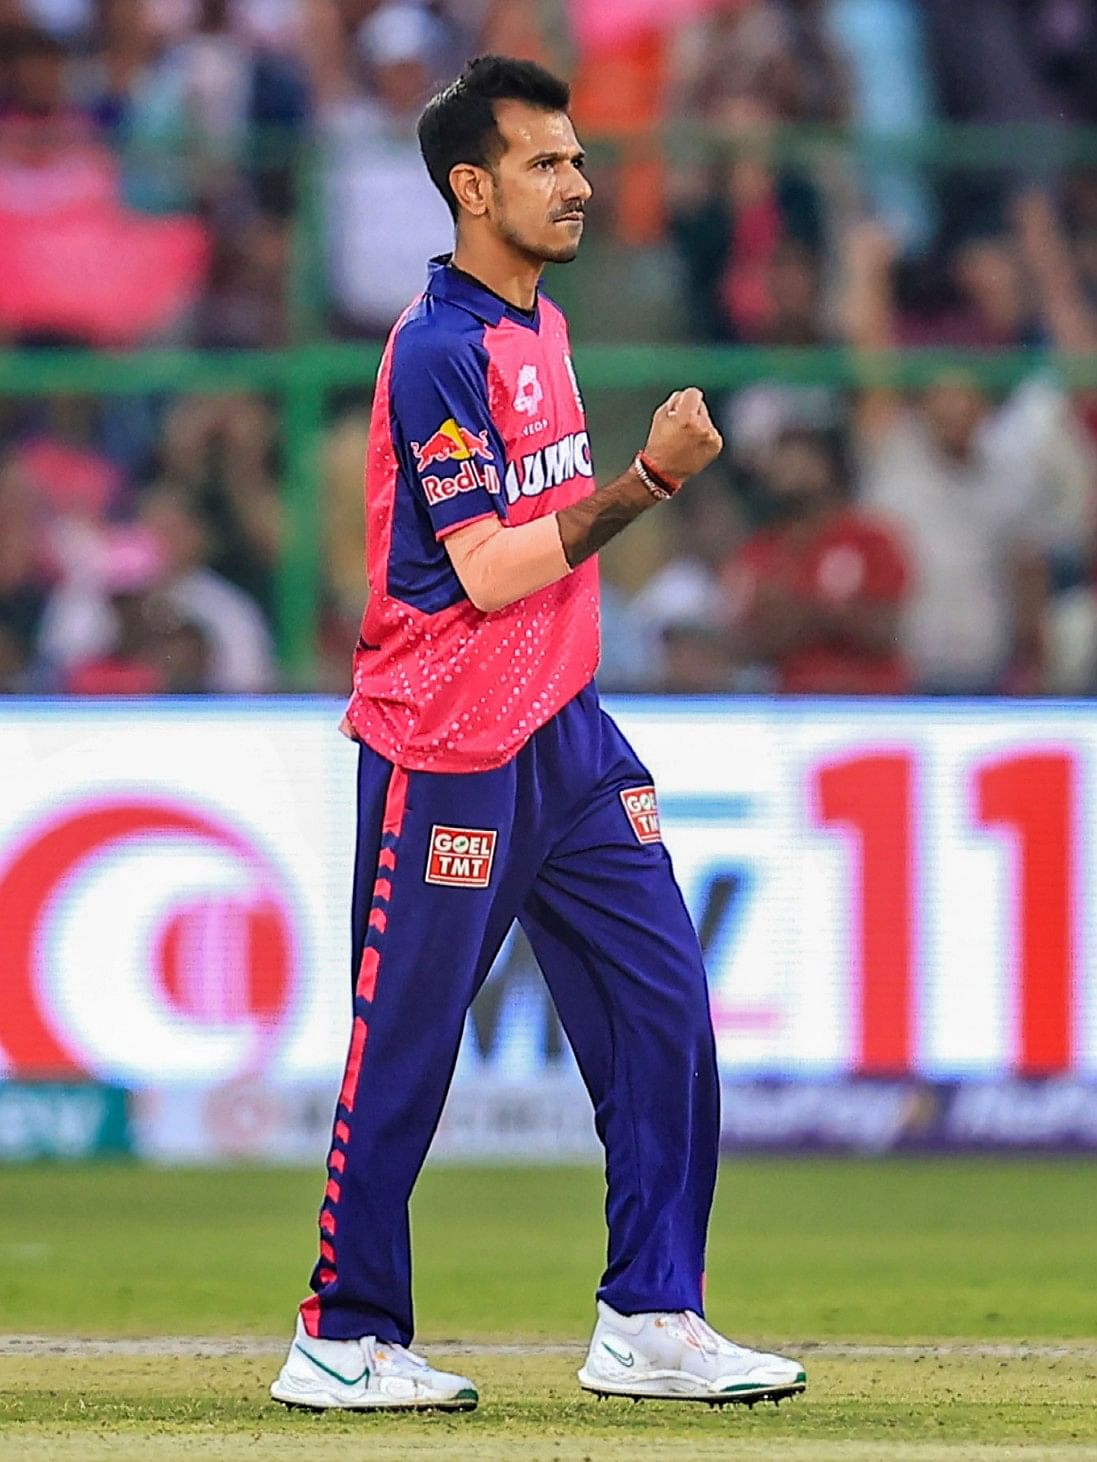 An impactful spinner, Yuzvendra Chahal is well known for his consistency and variations, making it difficult for batsmen to score quick runs.